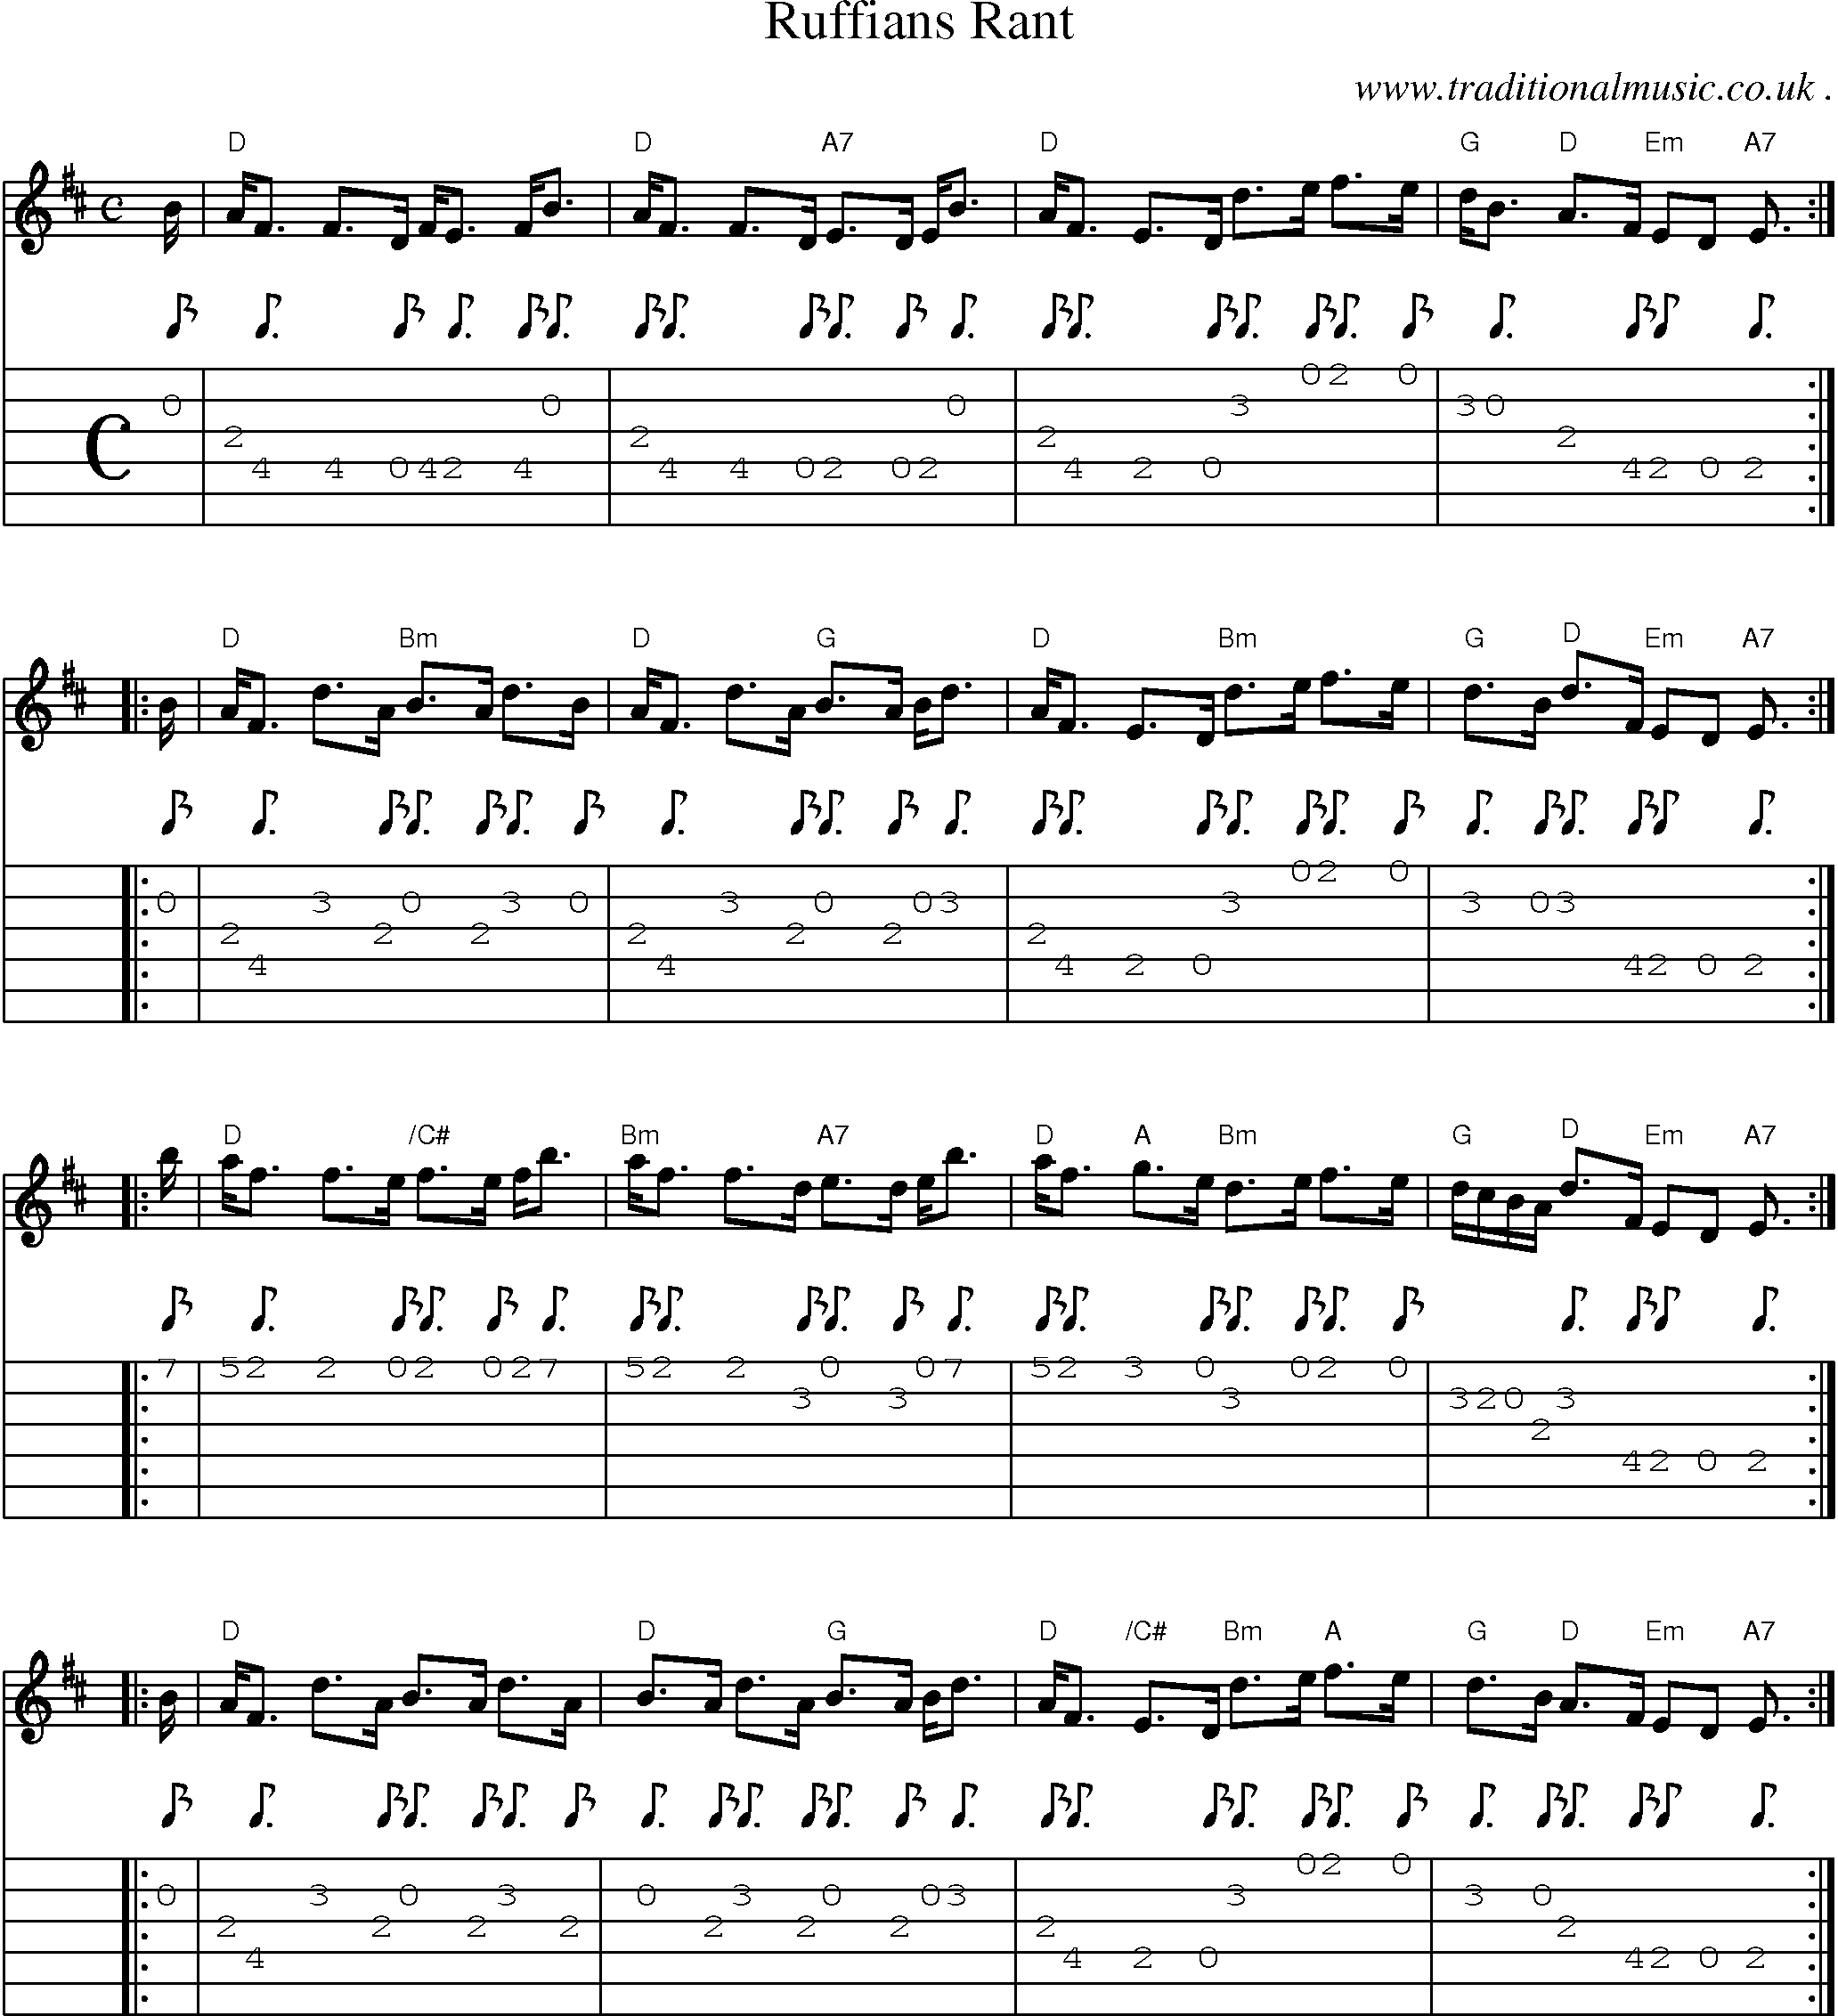 Sheet-music  score, Chords and Guitar Tabs for Ruffians Rant